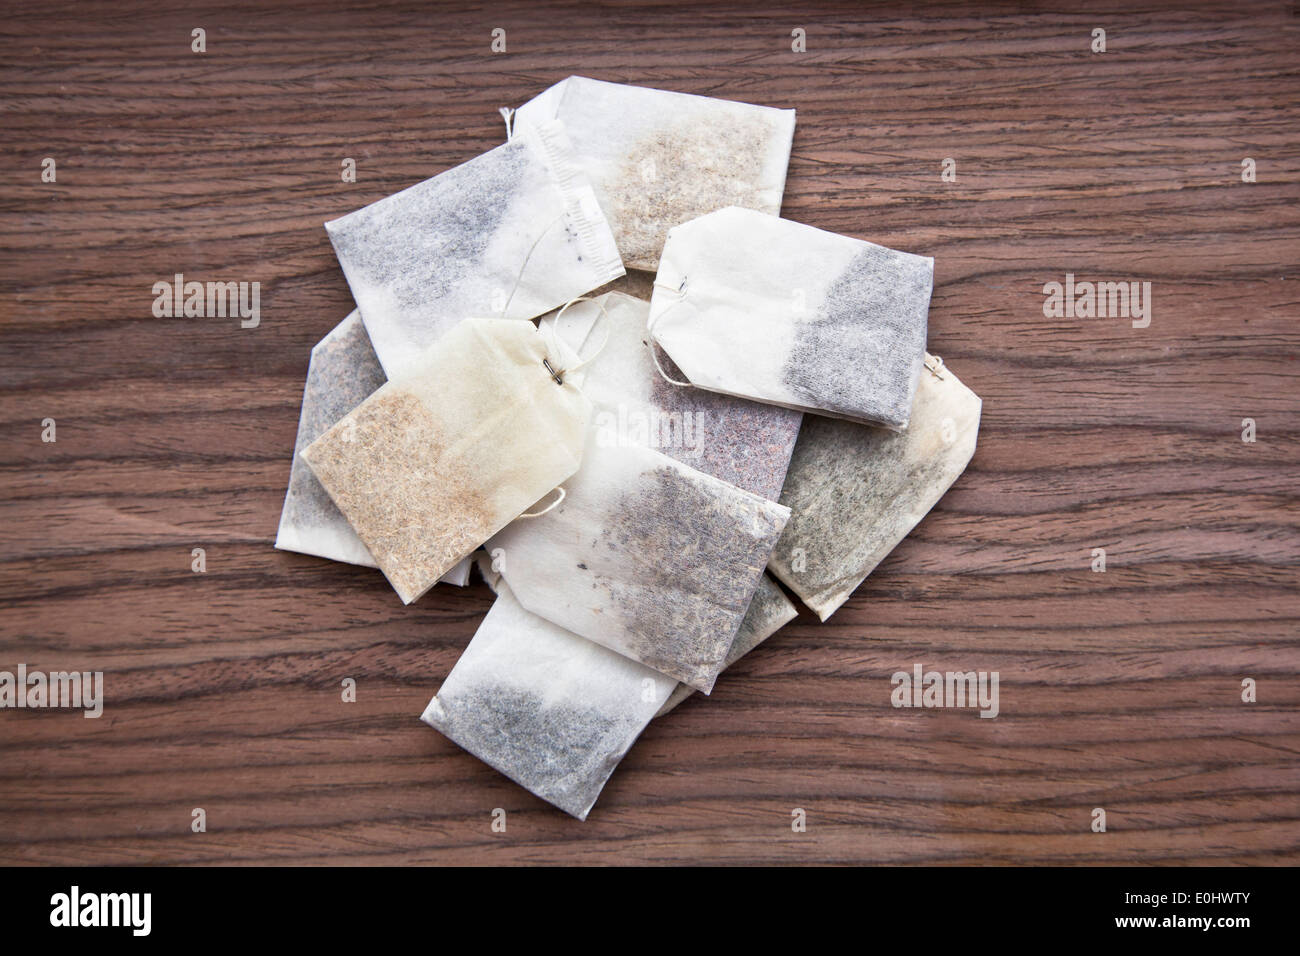 Different teabags on a wooden table Stock Photo